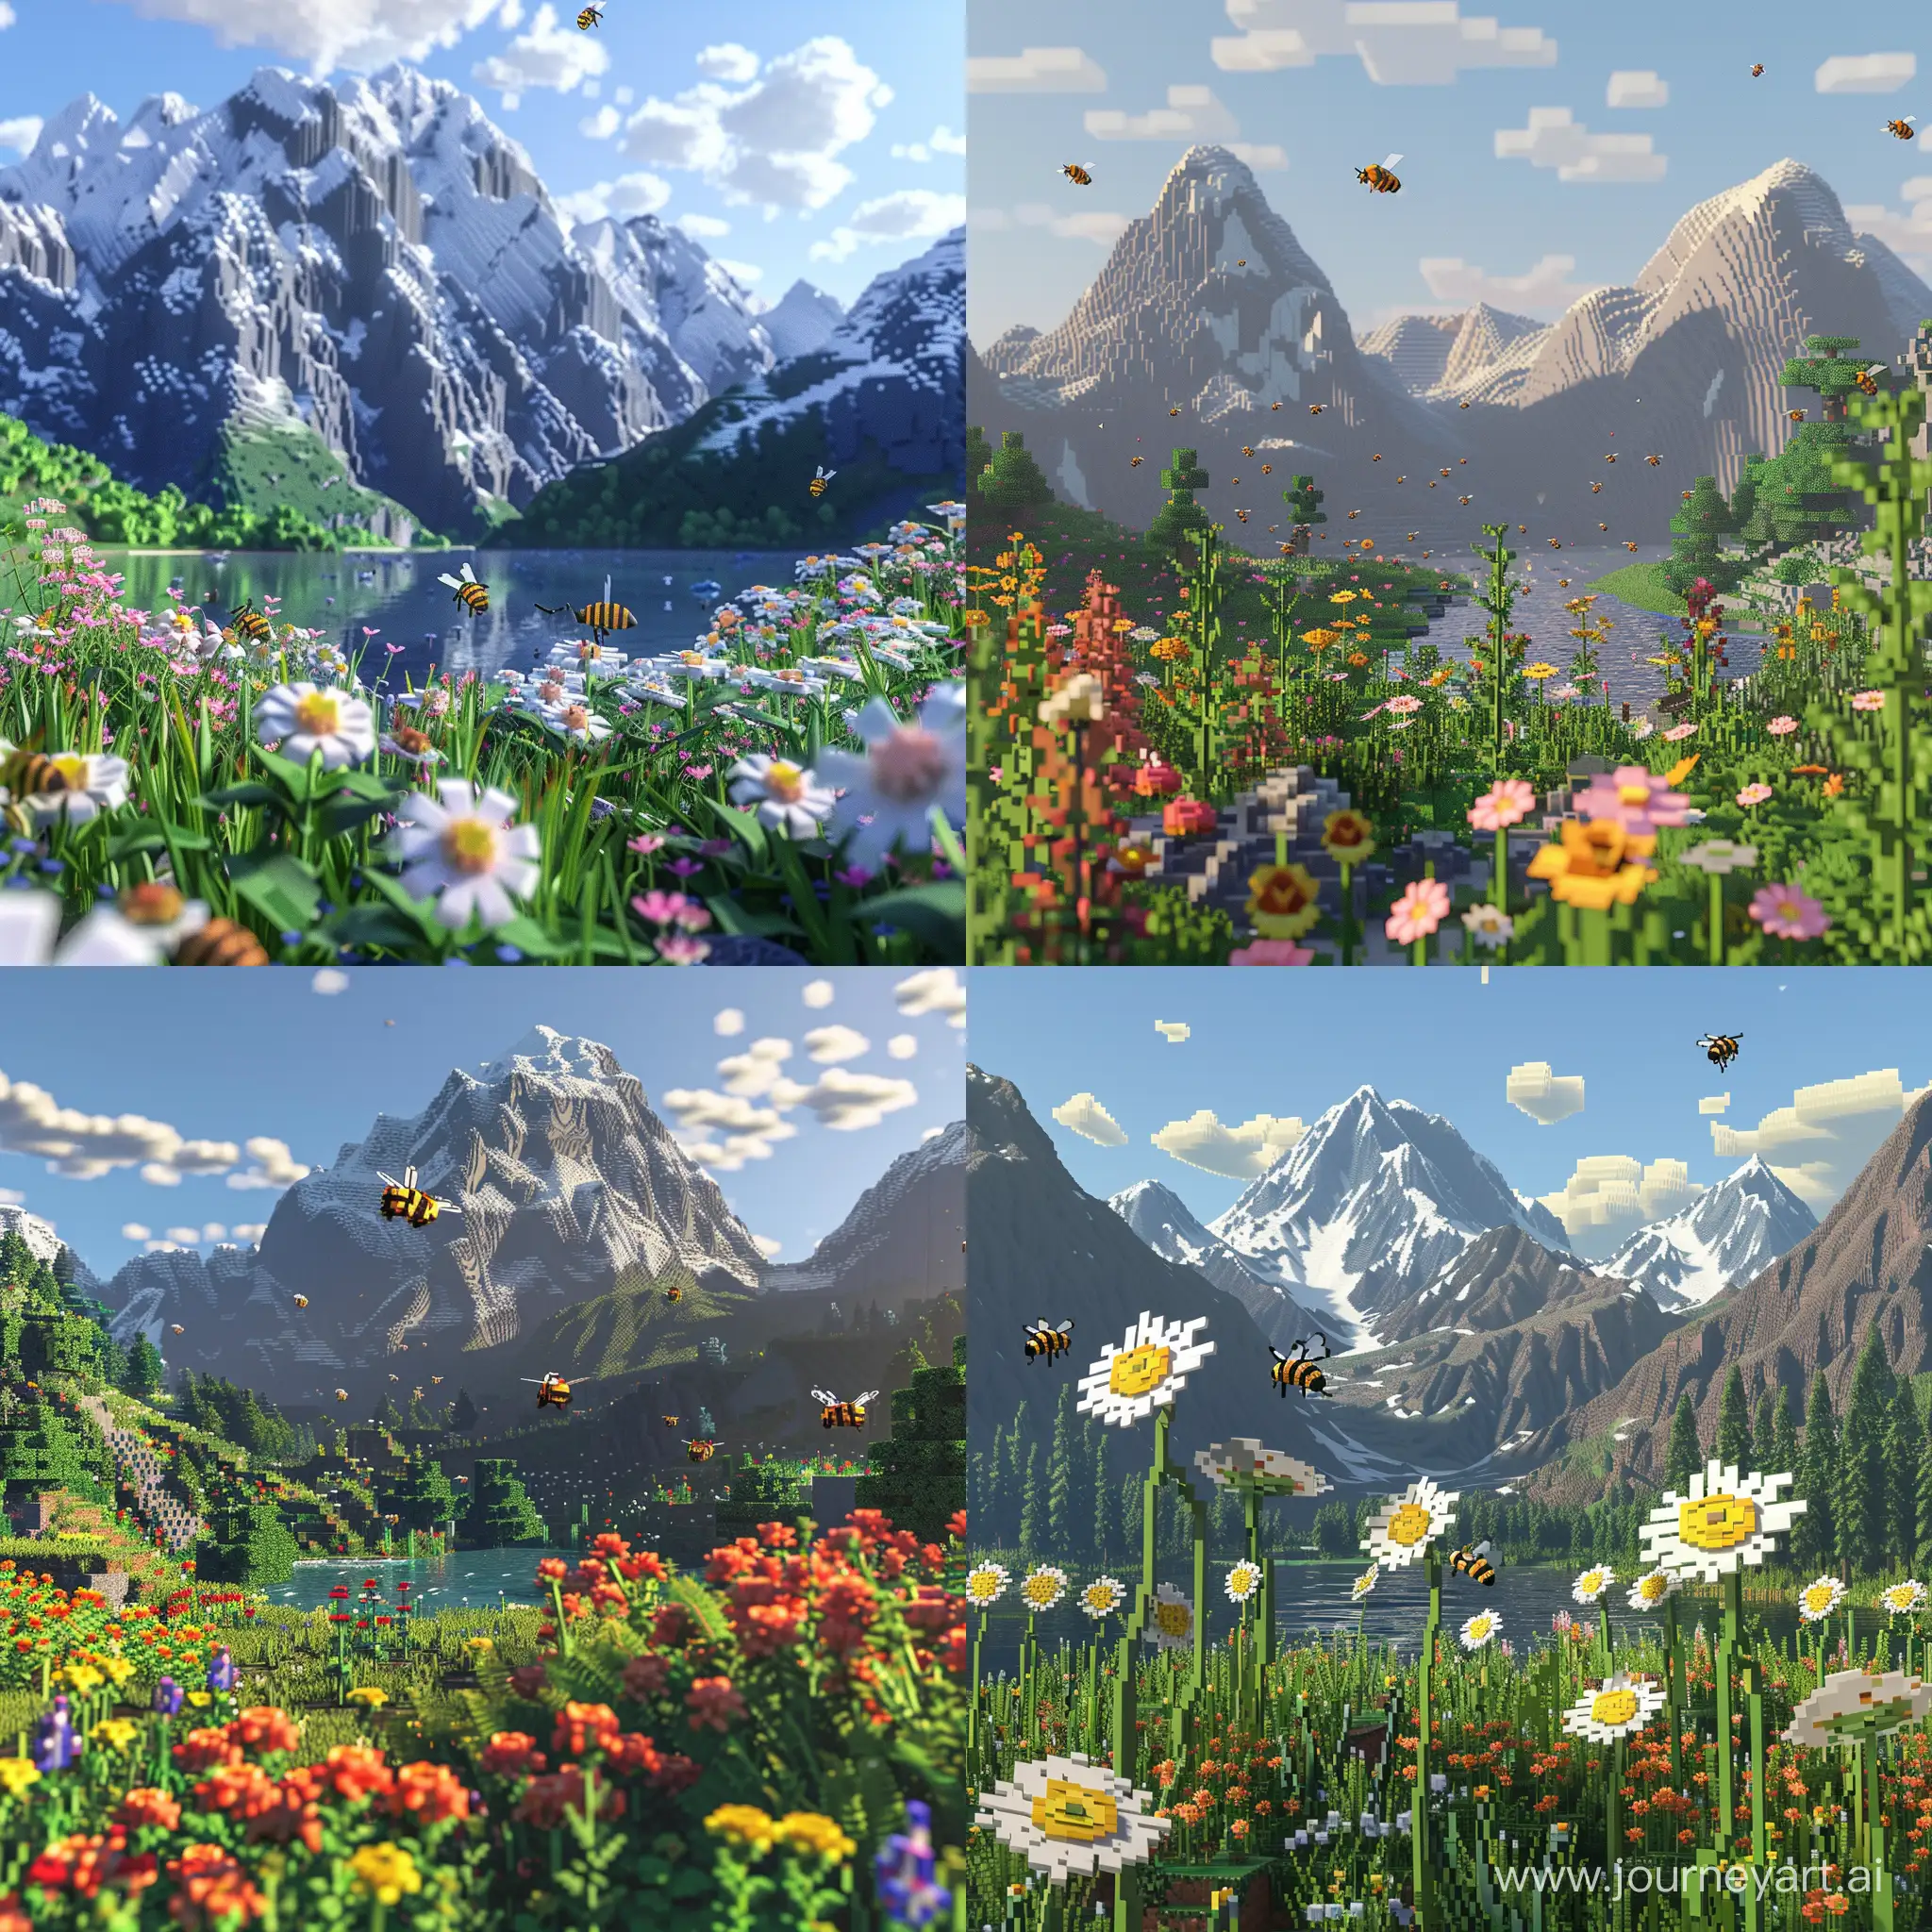 minecraft 3 realistic flowers bees mountains and mountain lake pixelart style minecraft style